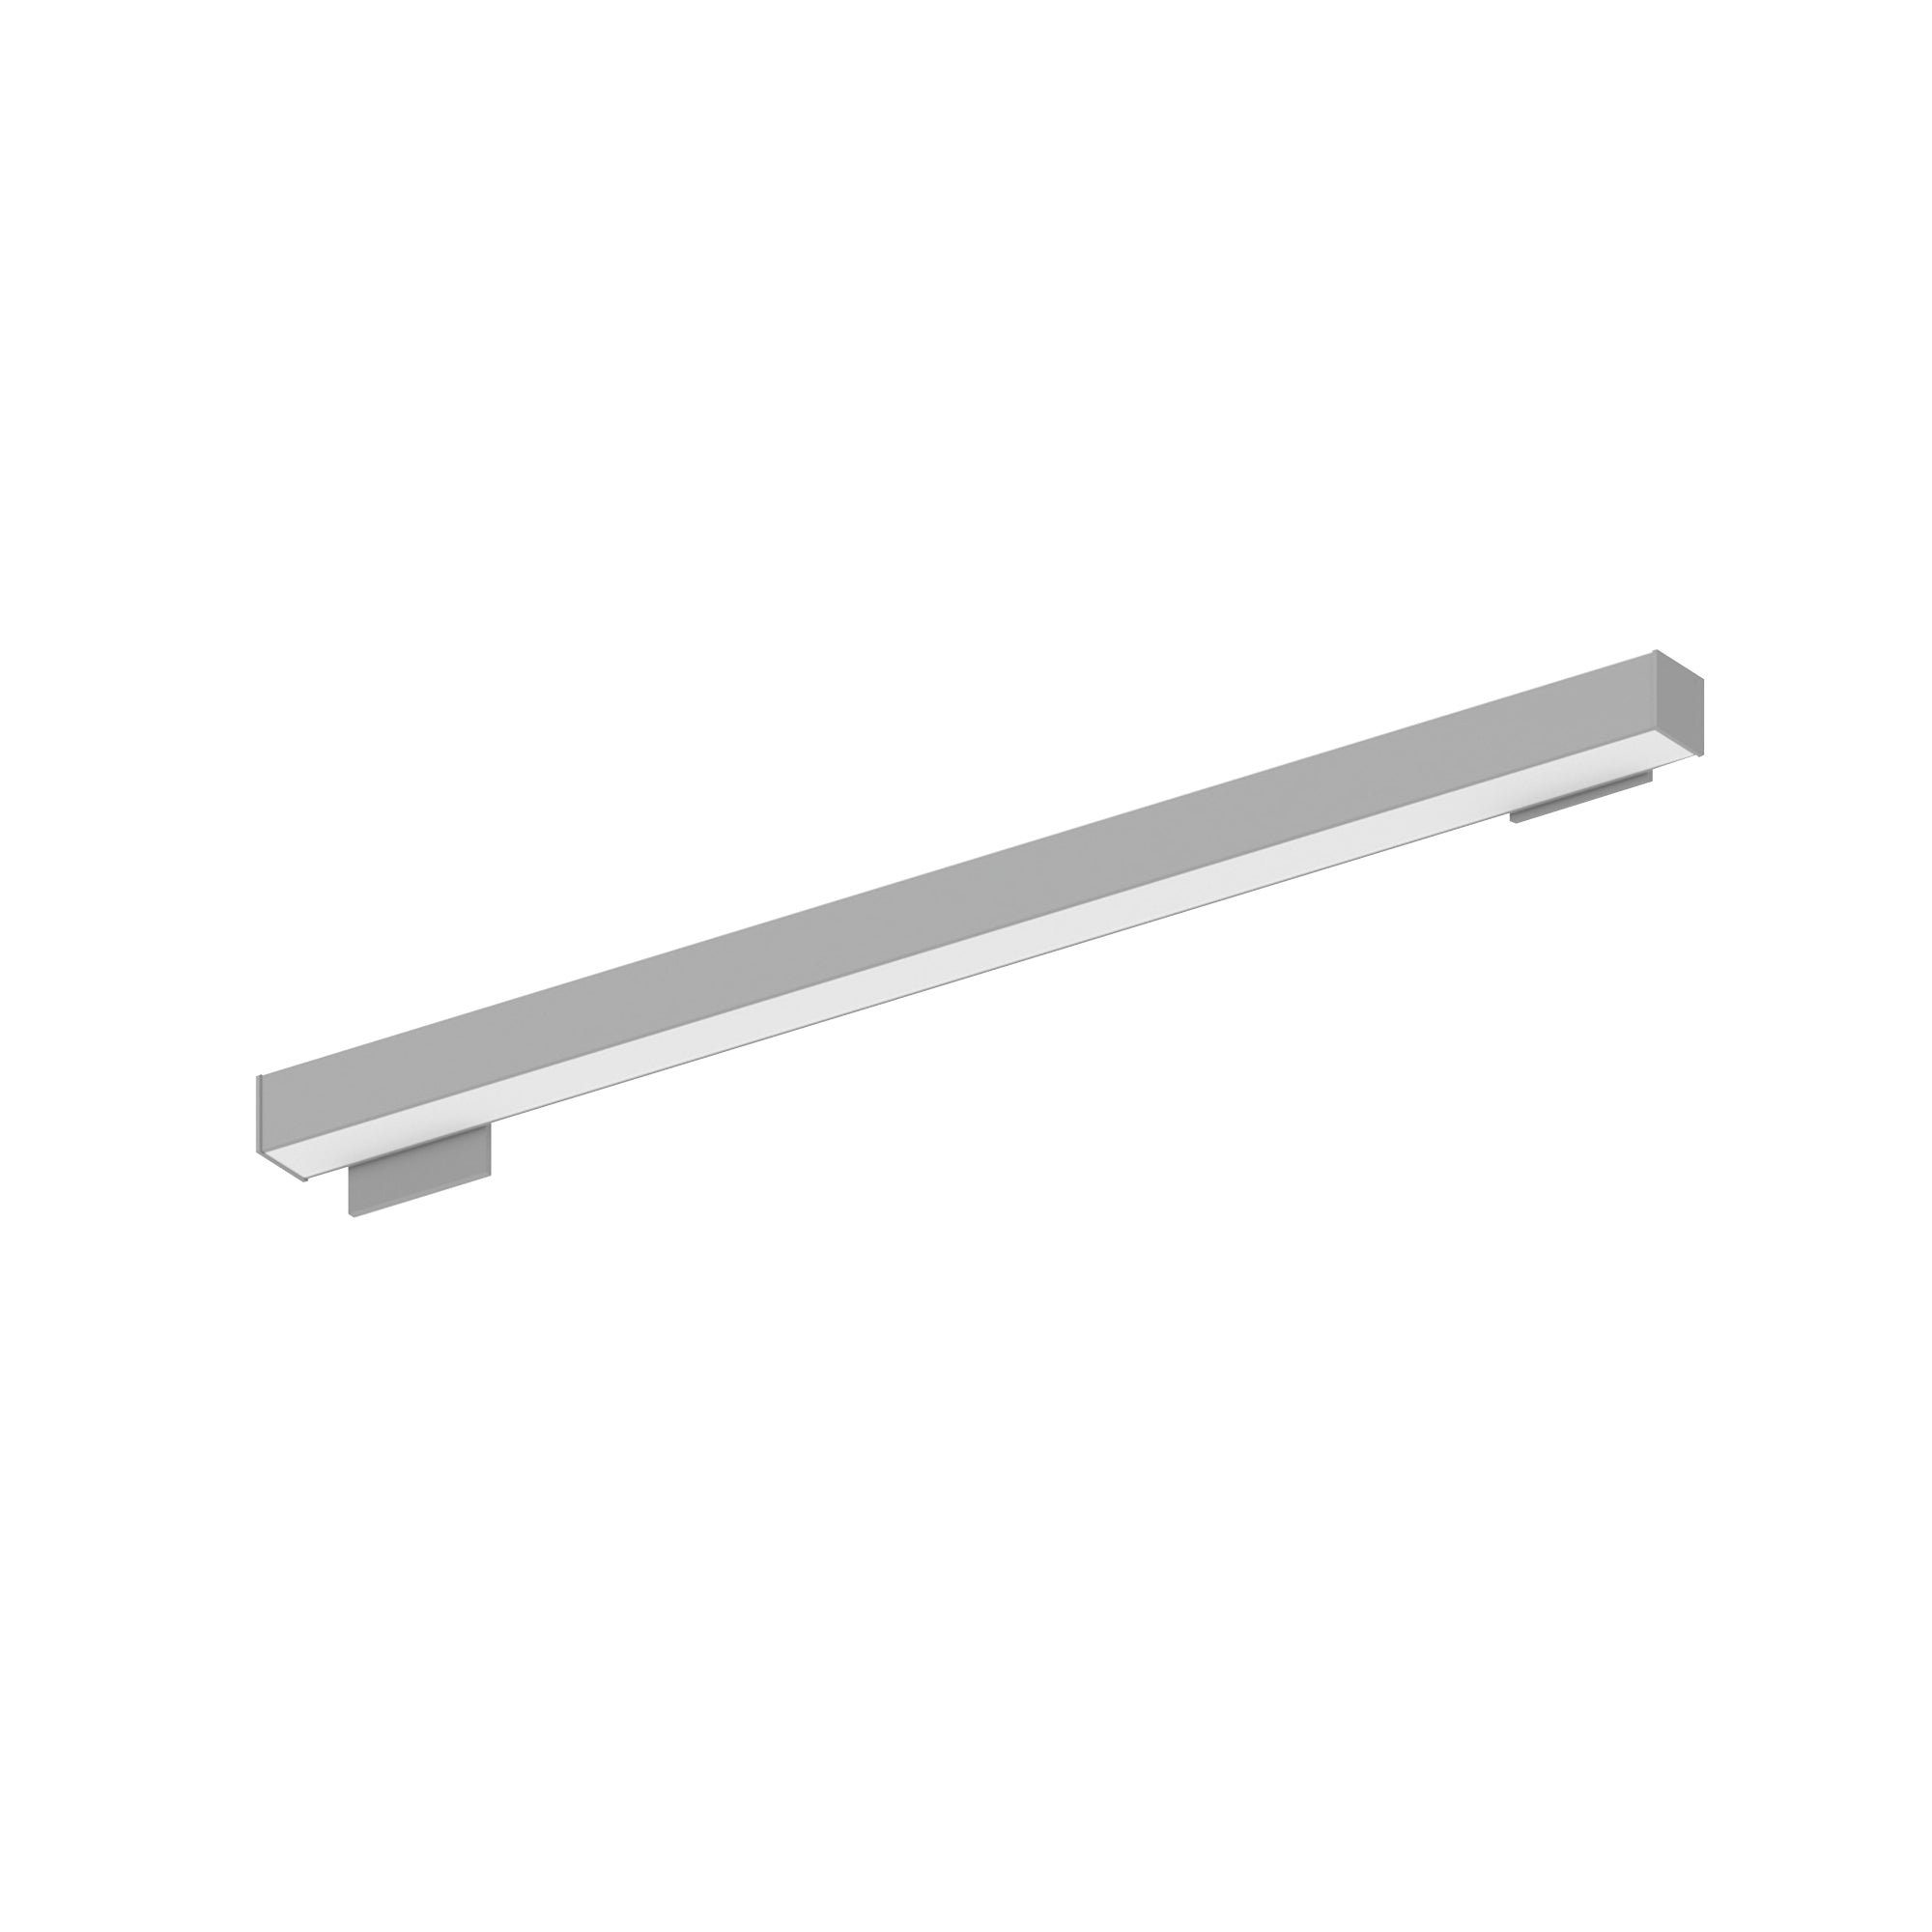 Nora Lighting NWLIN-41040A/L4-R2 - Linear - 4' L-Line LED Wall Mount Linear, 4200lm / 4000K, 4 Inchx4 Inch Left Plate & 2 Inchx4 Inch Right Plate, Aluminum Finish